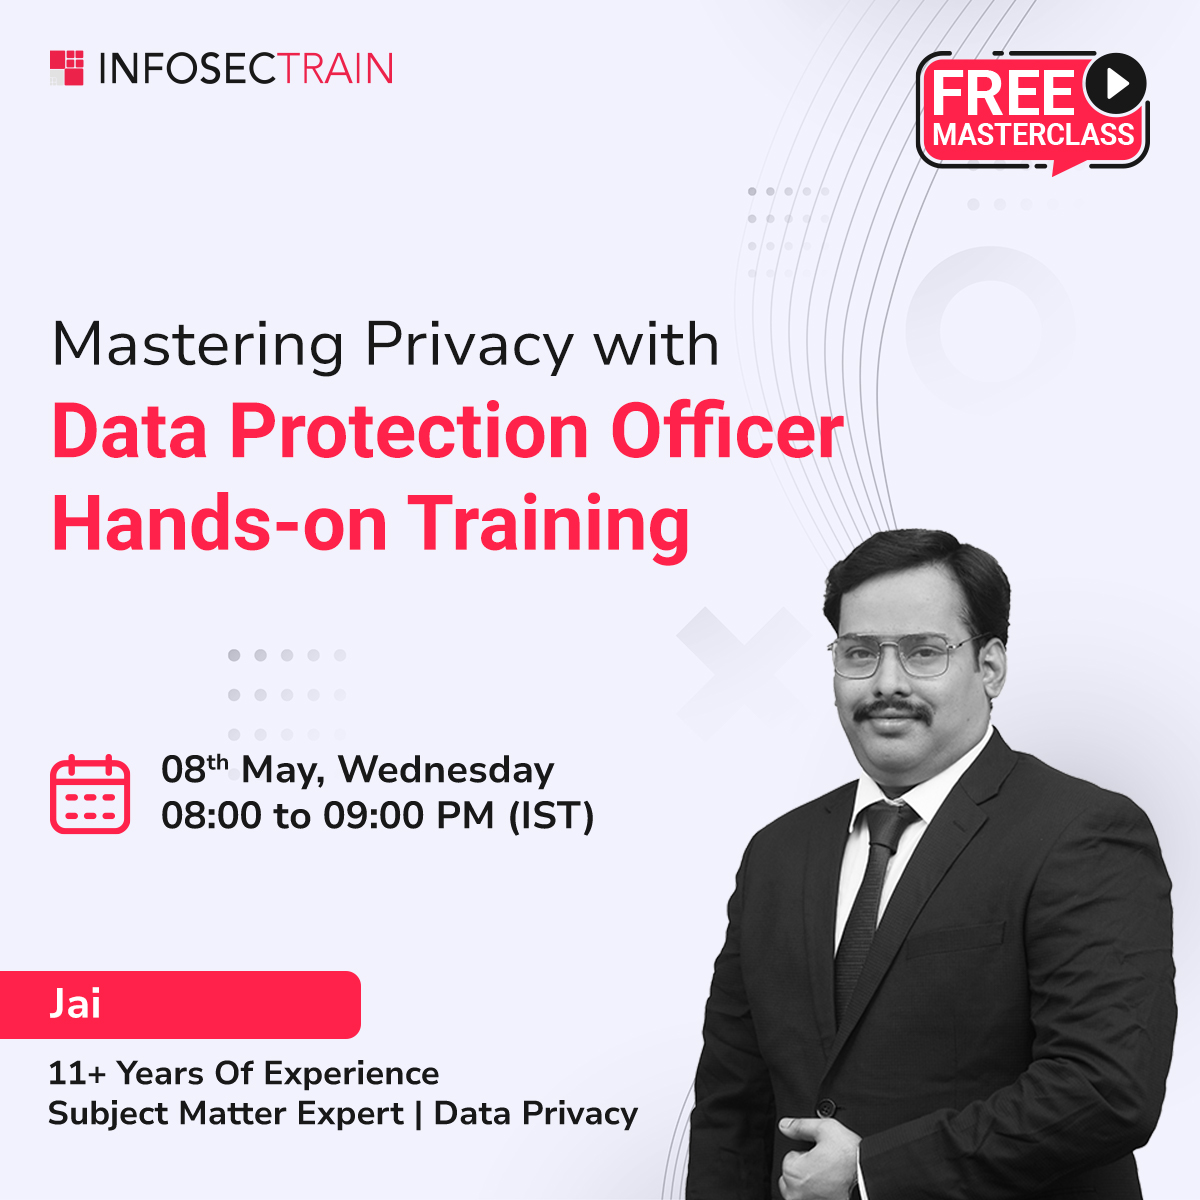 Mastering Privacy with DPO (Data Protection Officer) Hands-on Training, Online Event